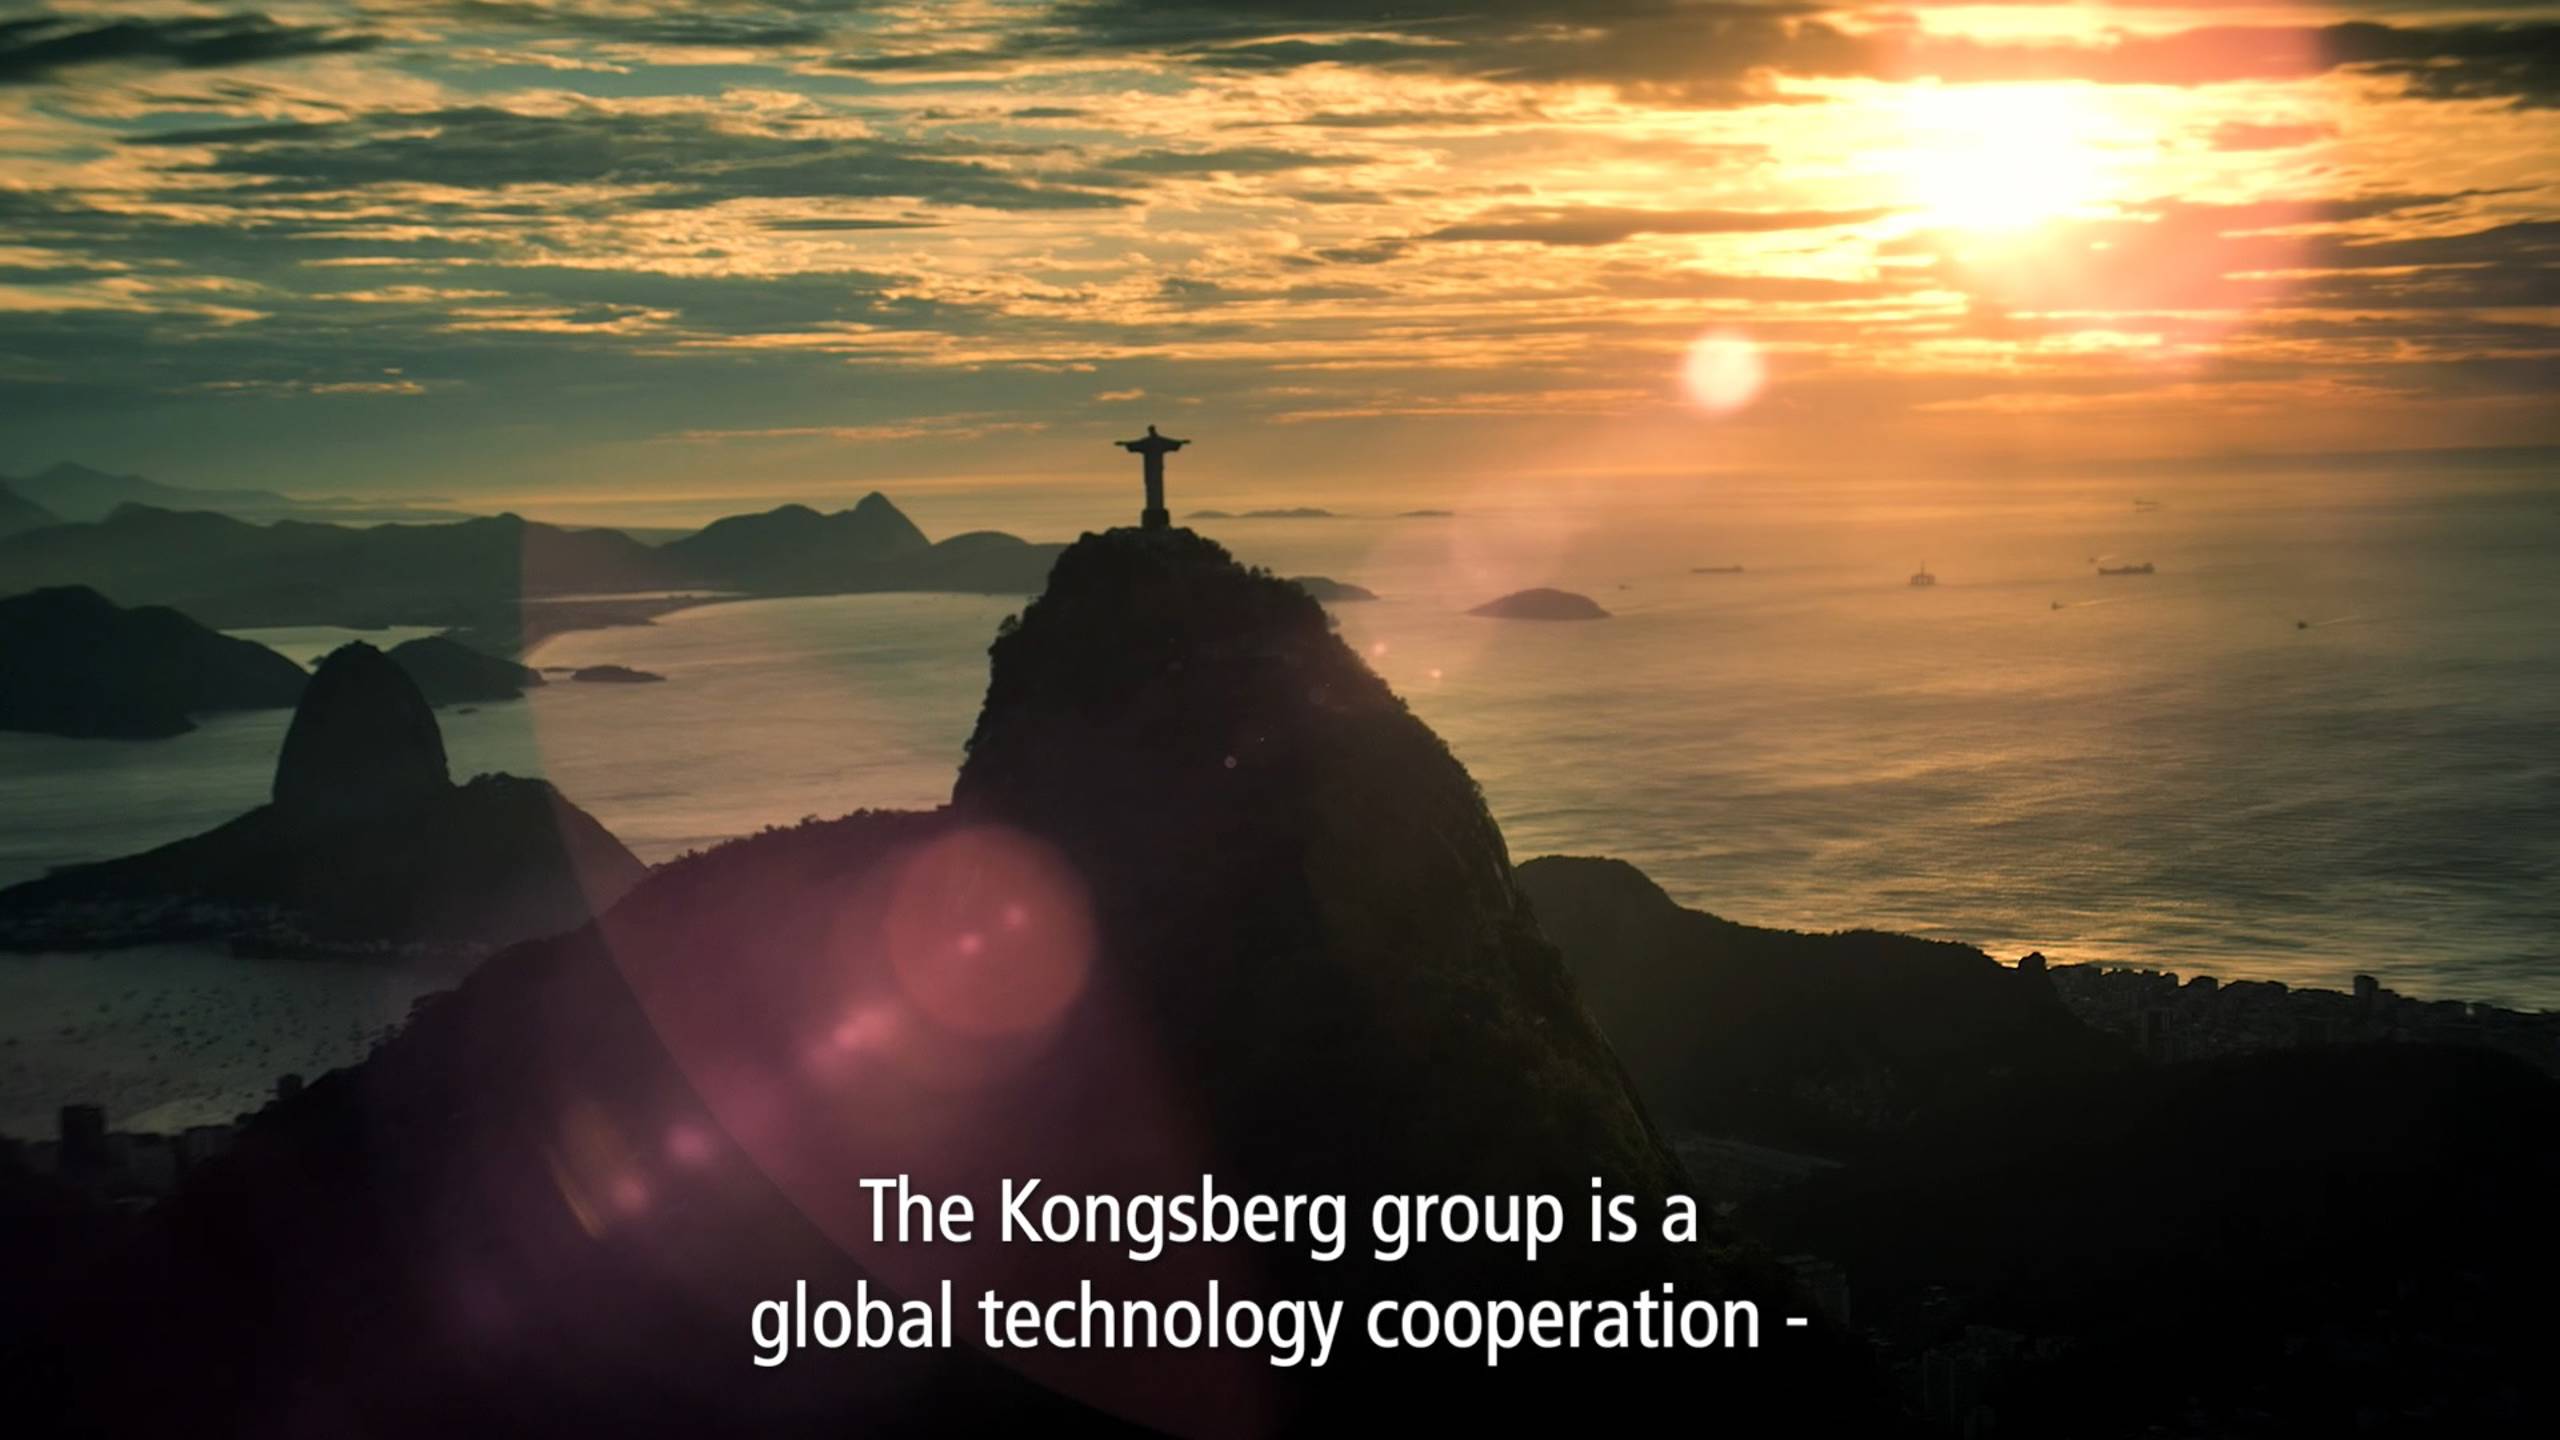 Aerial view of Rio de Janeiro in Brazil with the text: The Kongsberg group is a global technology cooperation.